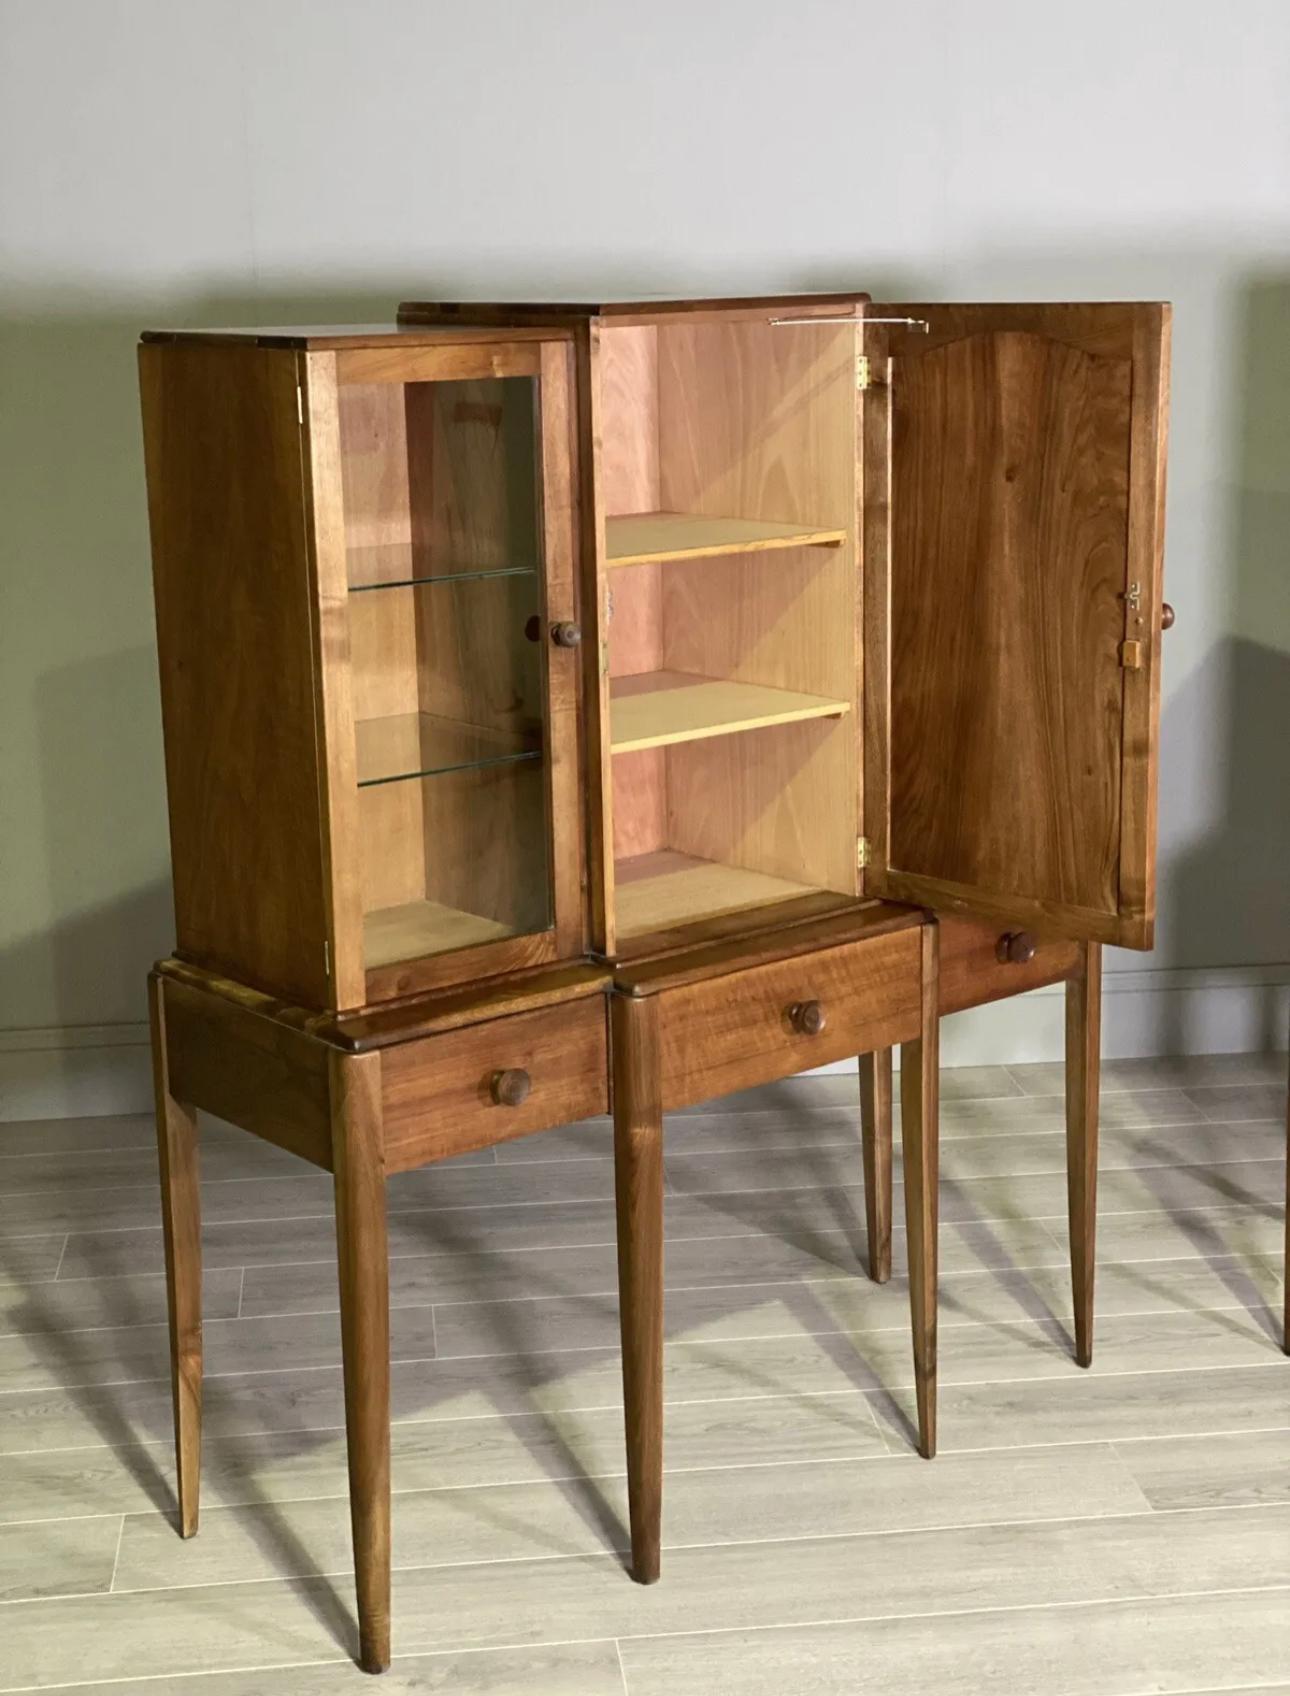 Hand-Crafted A Pair Of Walnut Cabinets By Arthur Reynolds Of Ludlow For Sale